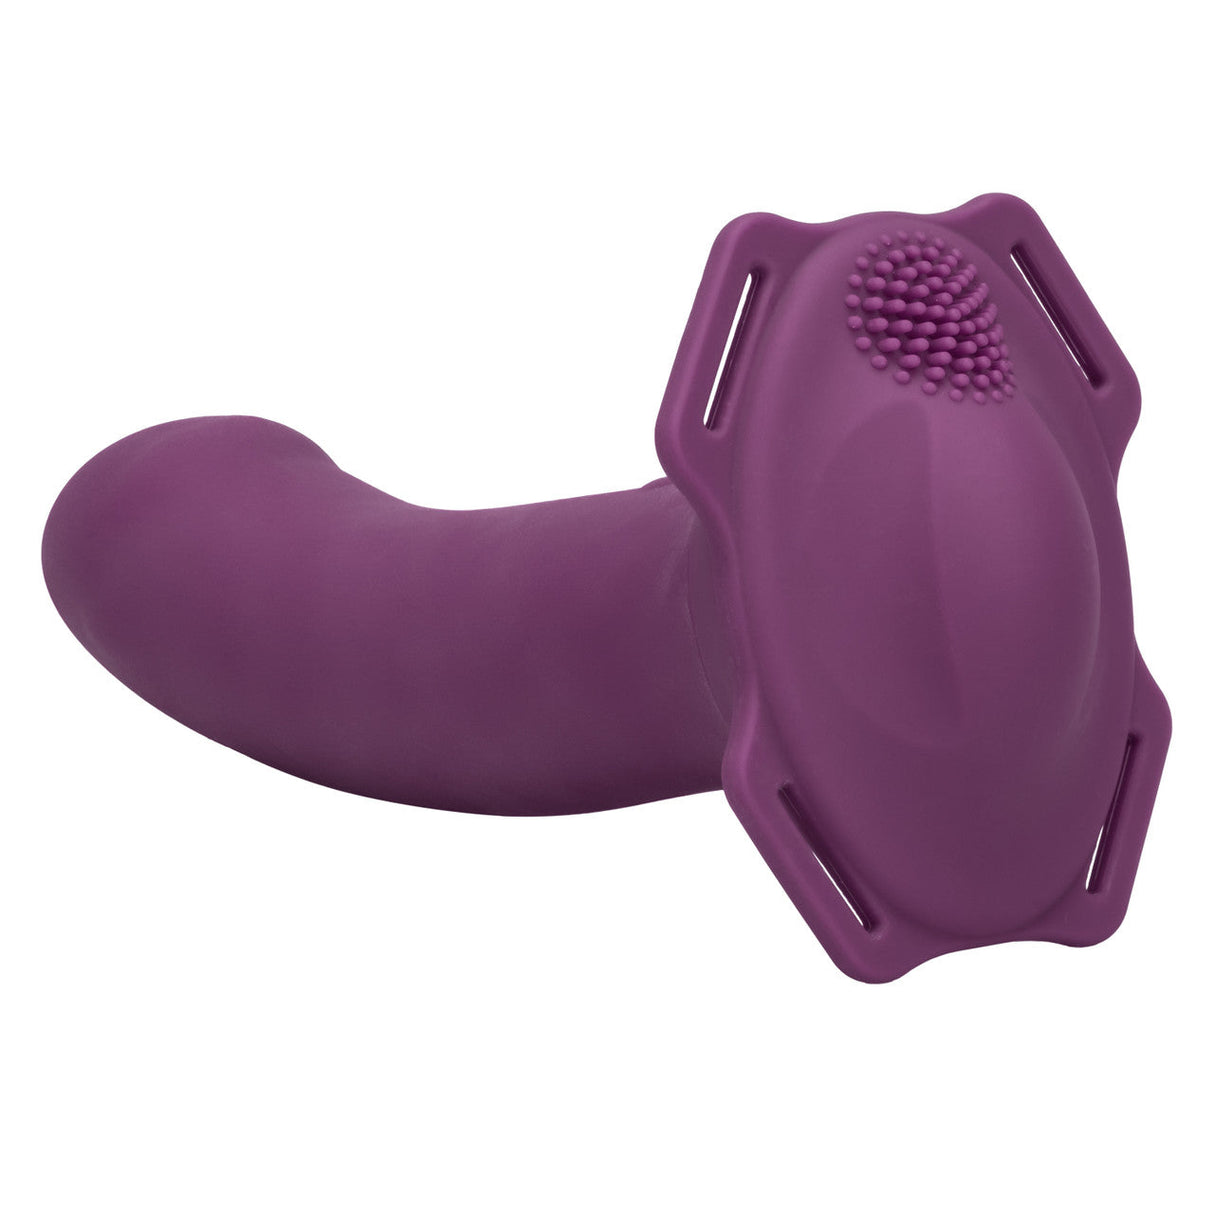 Her Royal Harness ME2 Rumble Vibrating Silicone Strap-On